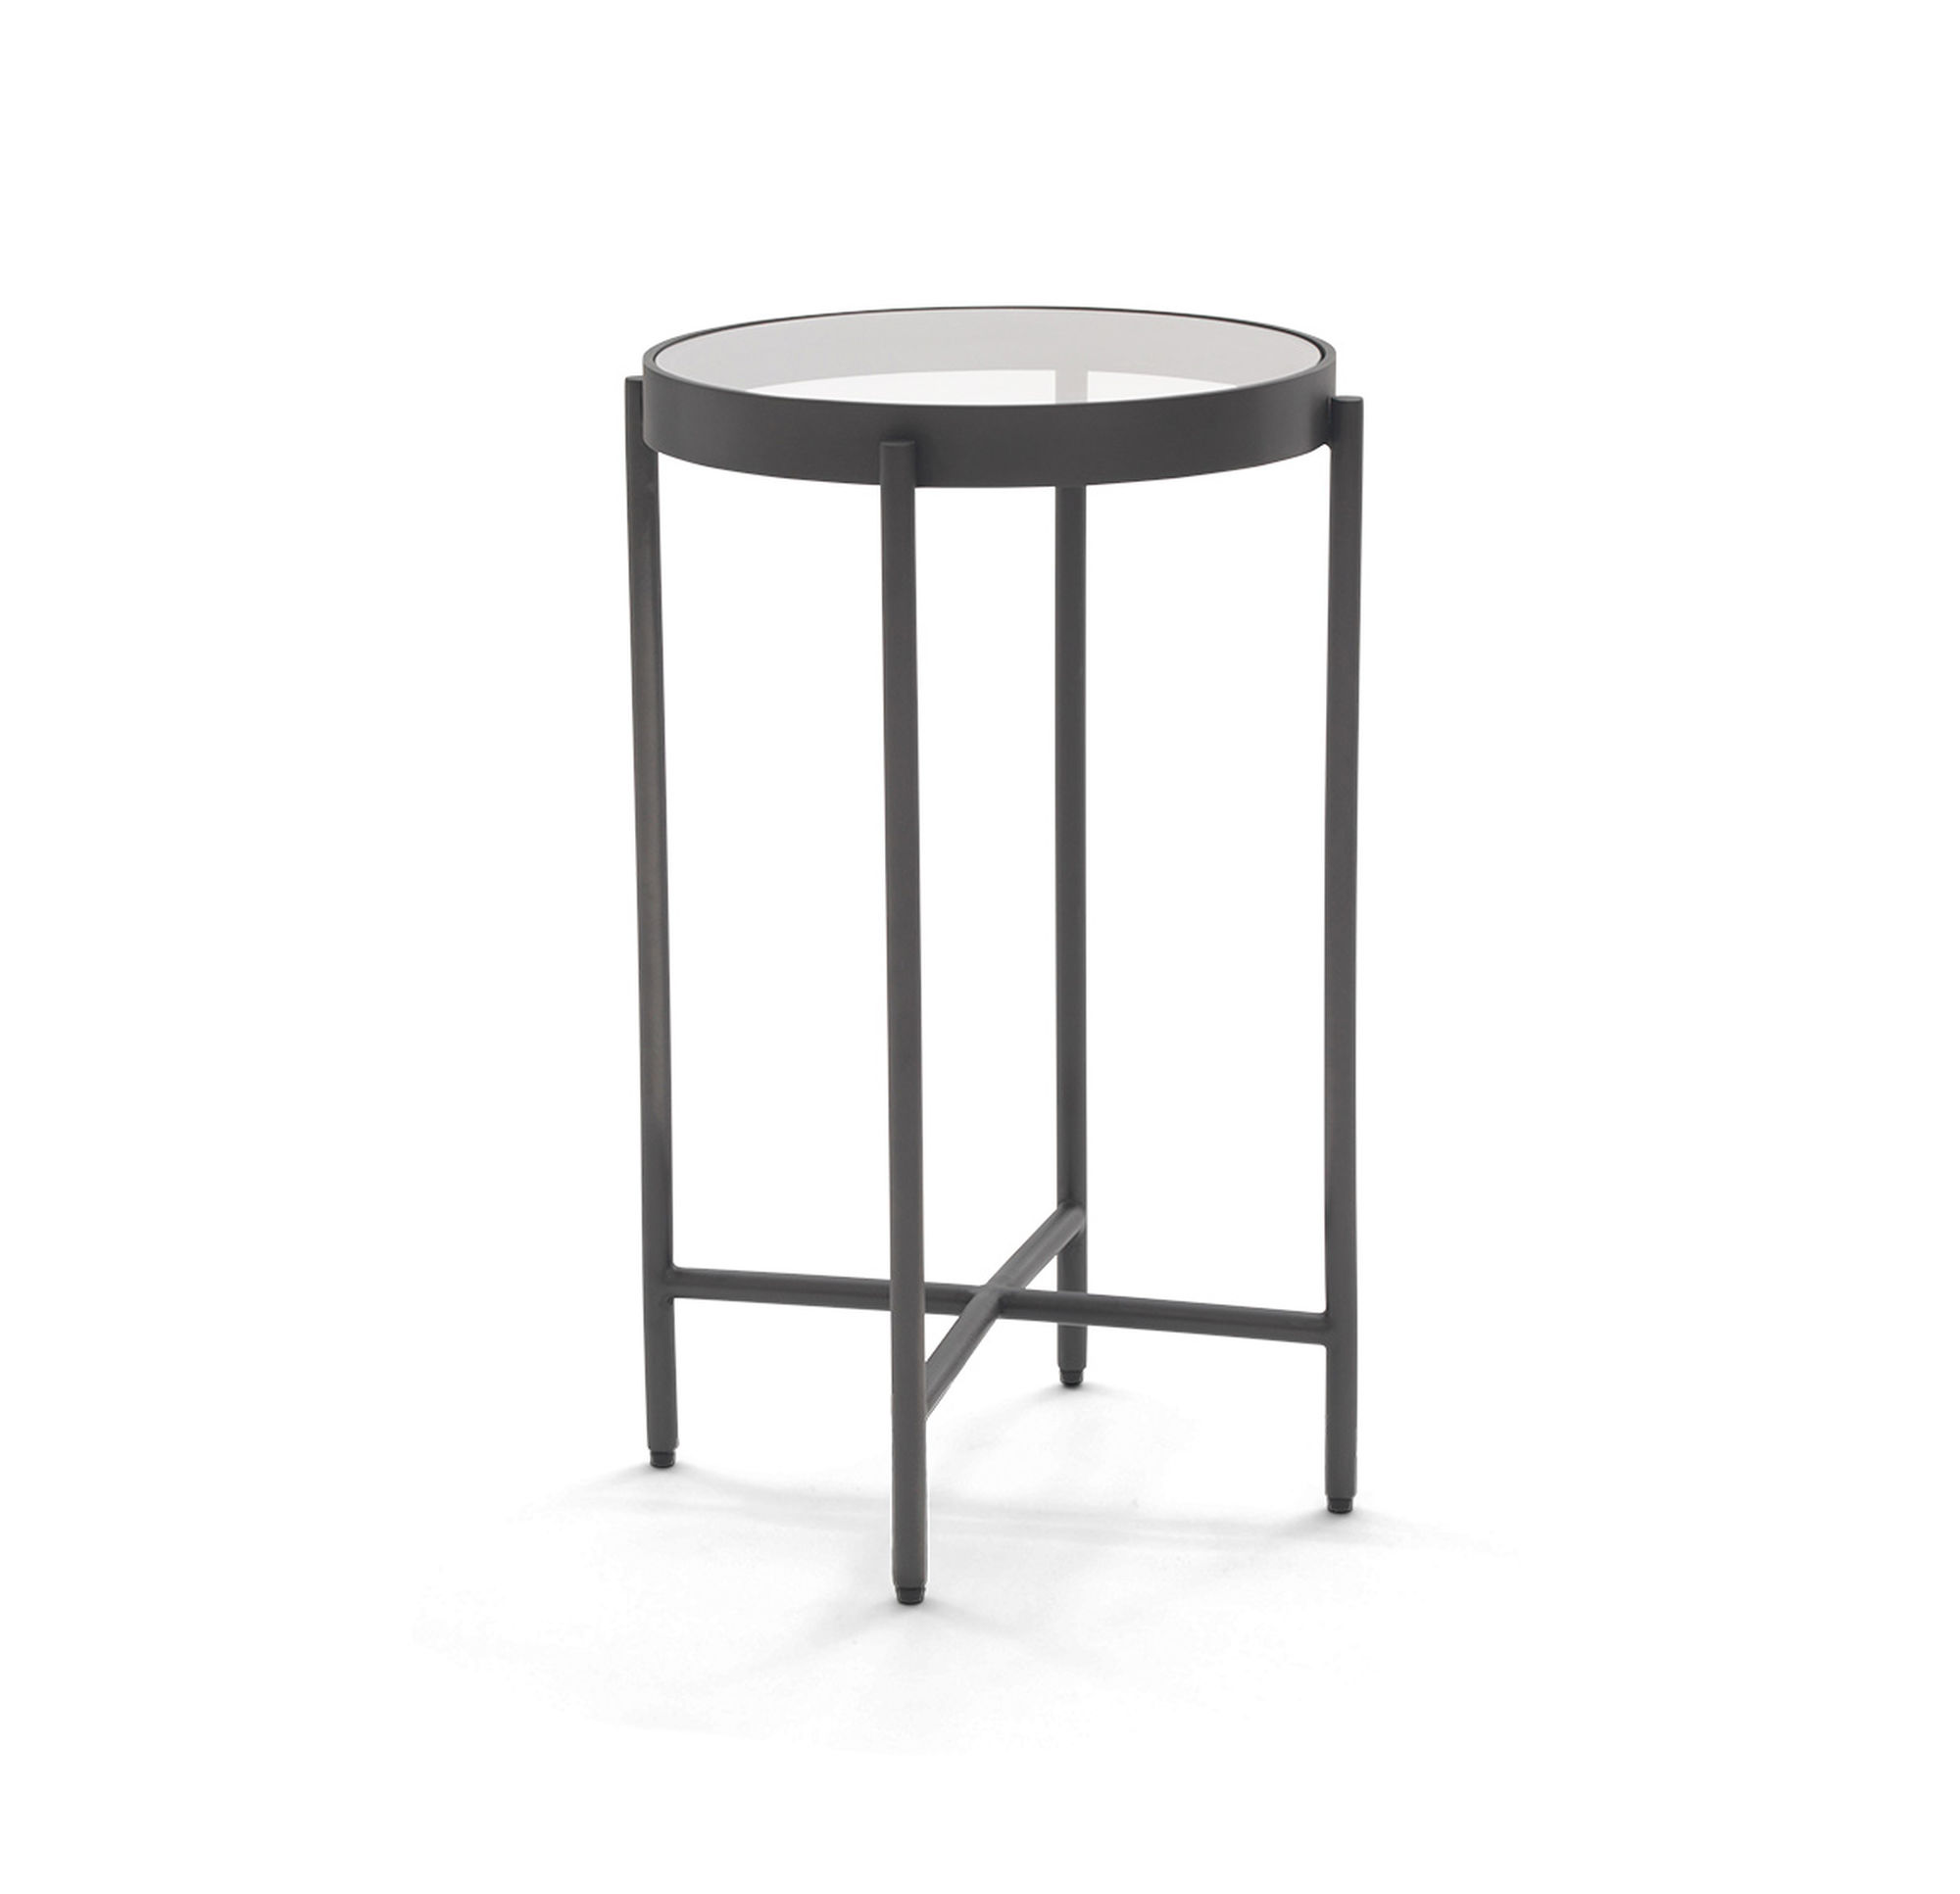 turino accent table turinoaccent hero clearance tables res black marble coffee set unique nesting jcpenney floor lamps broadmoore furniture contemporary desk penneys dining with